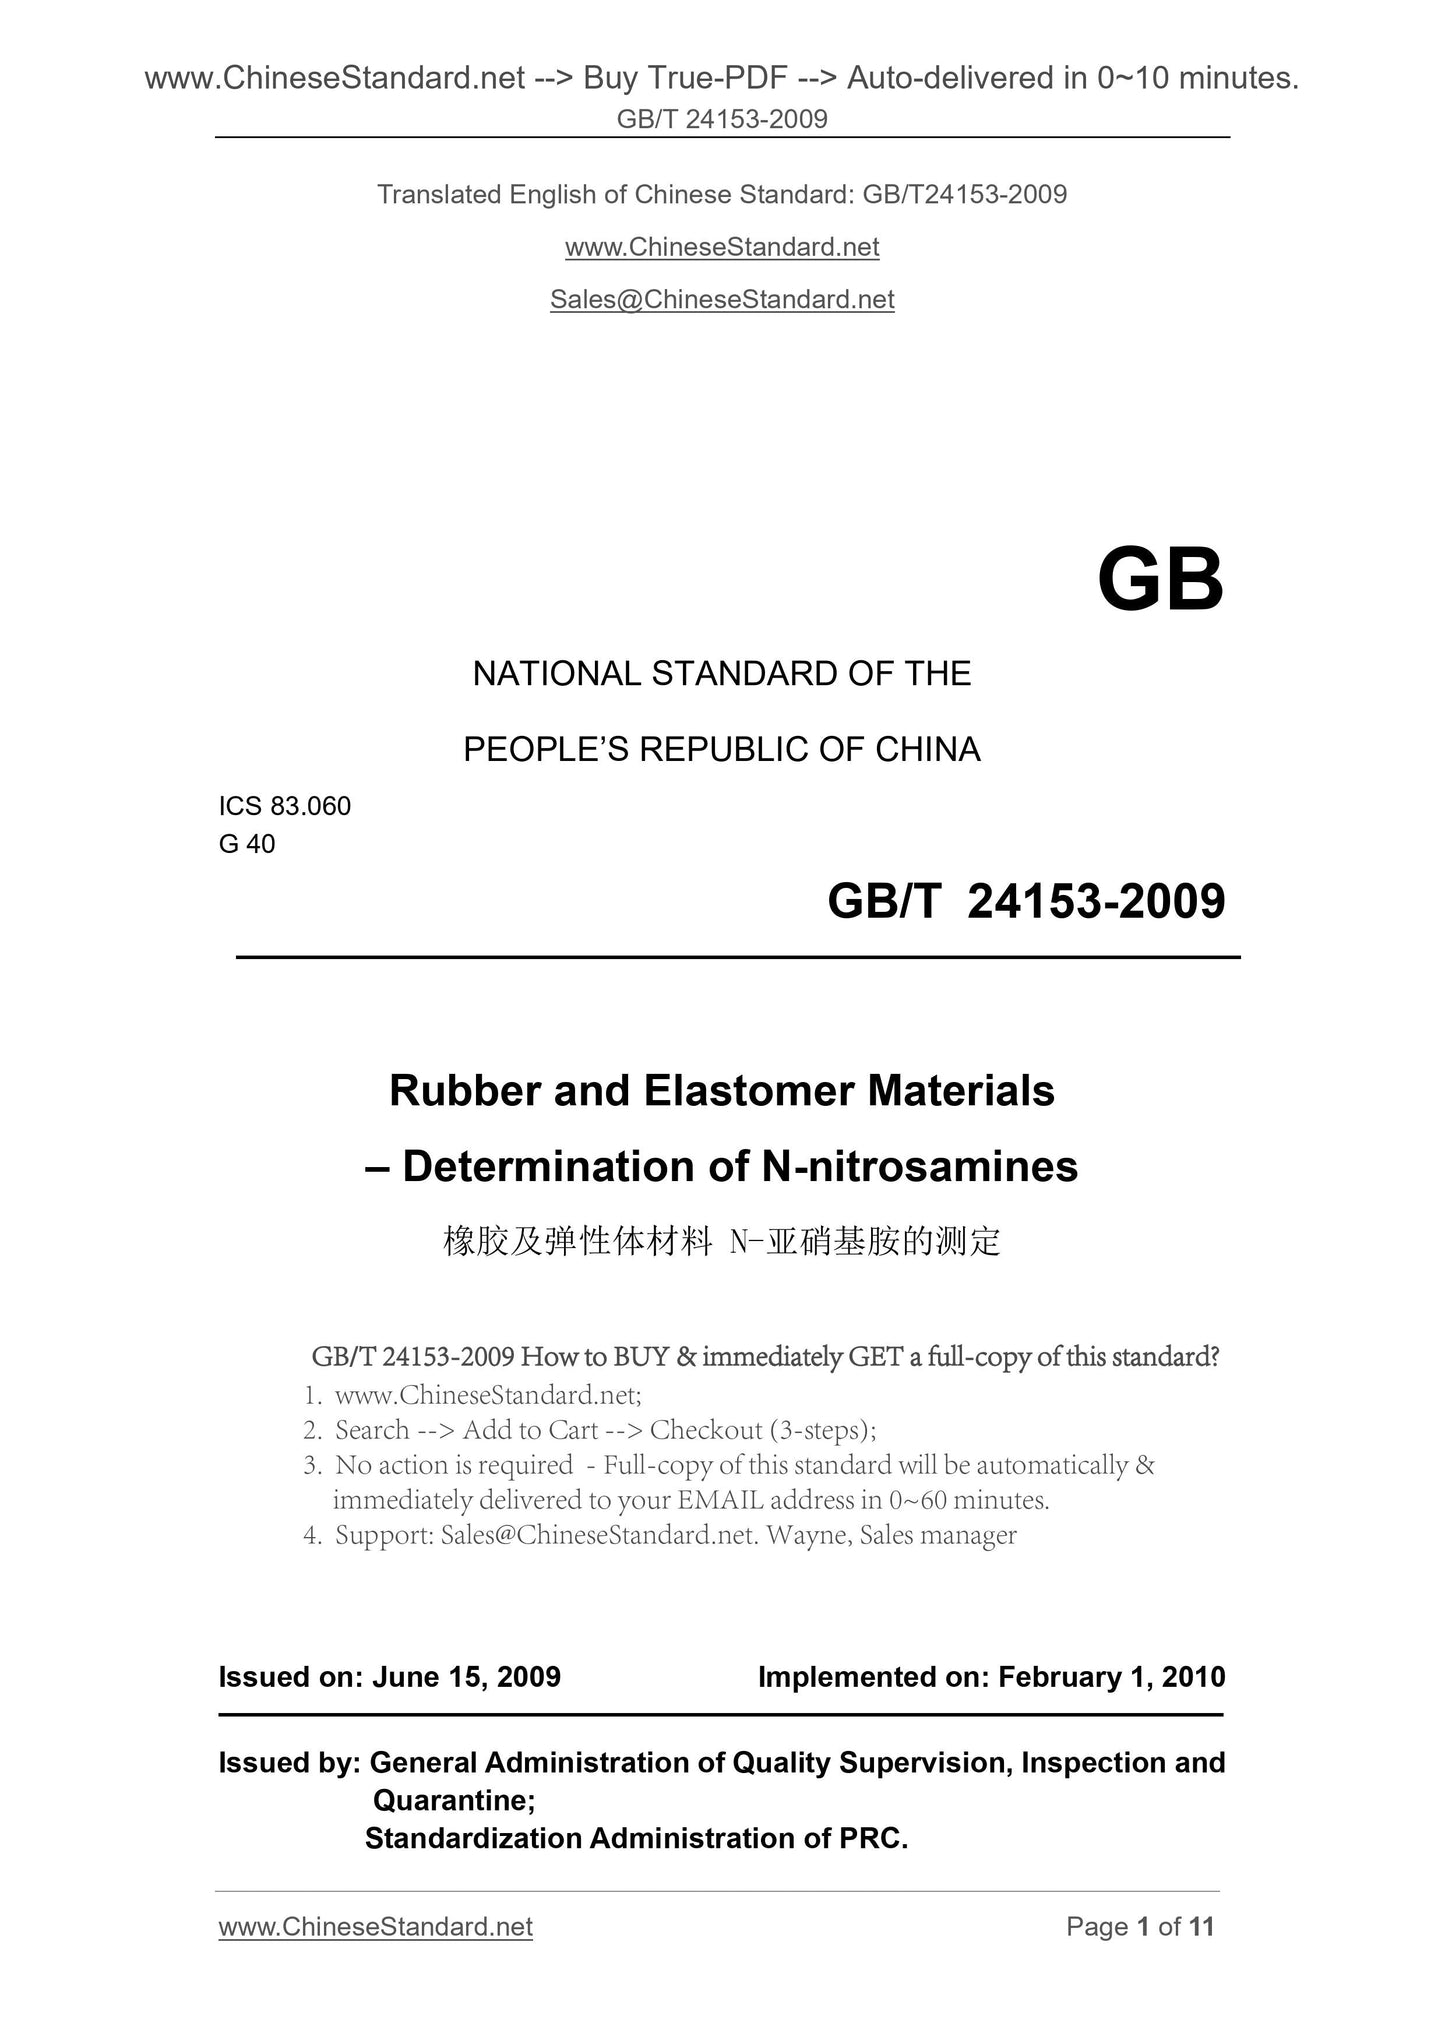 GB/T 24153-2009 Page 1